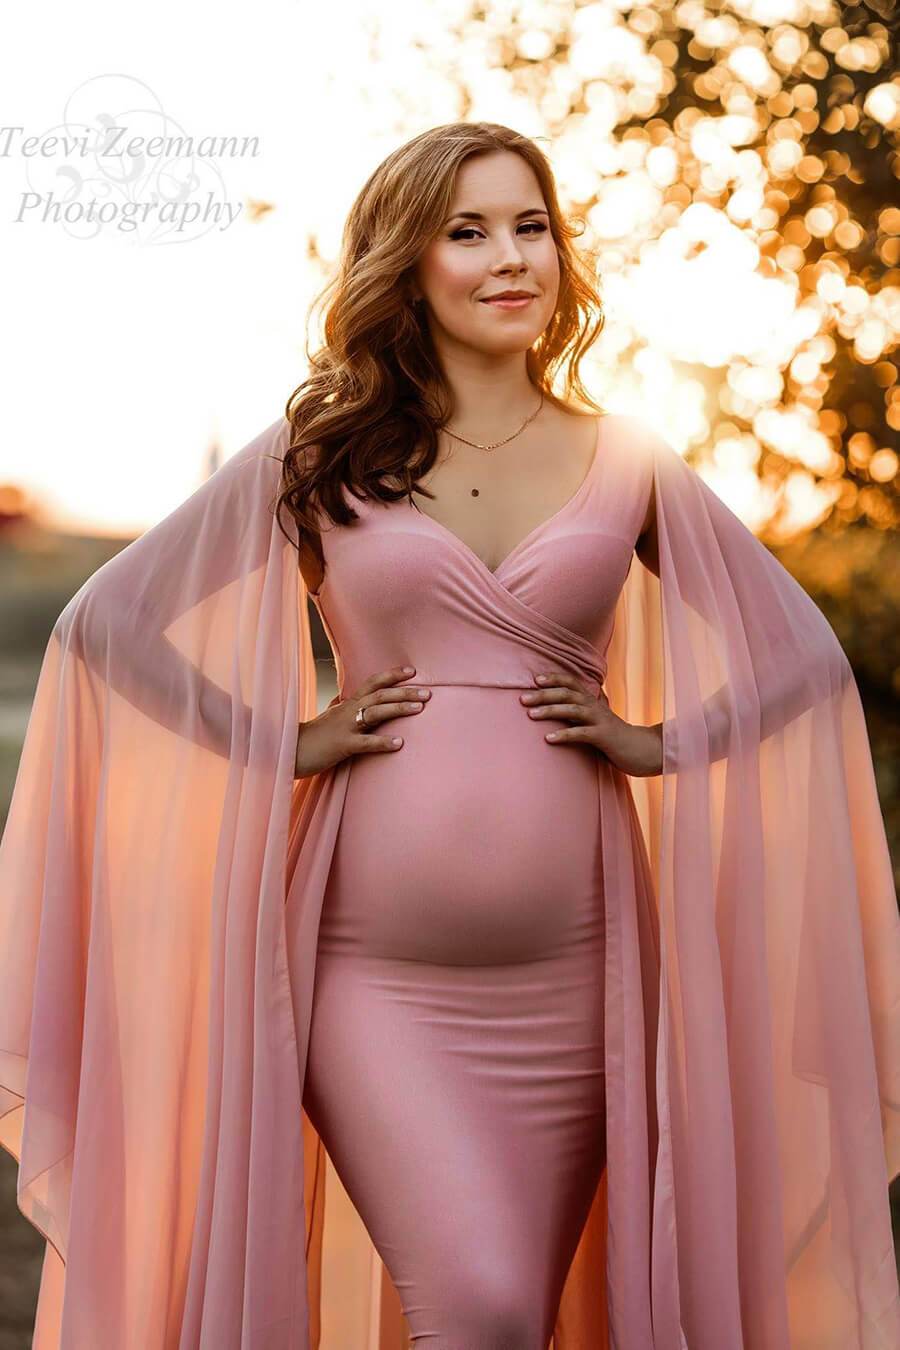 This pregnant women has short brown curly hair. She is wearing a long tight pink dress. The sleeves are loose and made out of chiffon